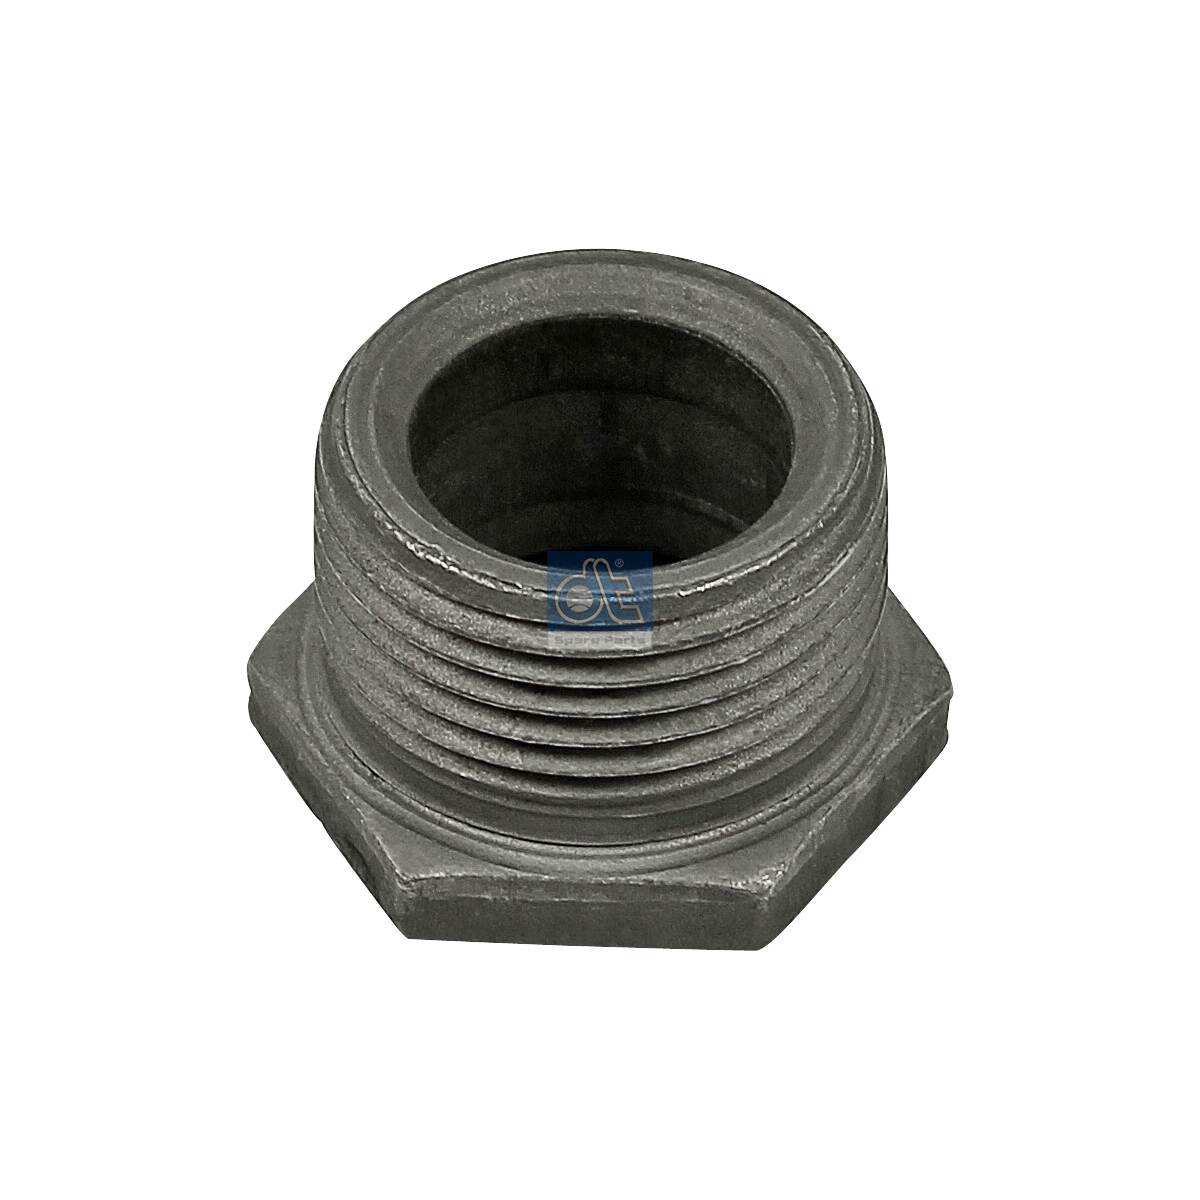 Screw - 4.40278 DT Spare Parts - 5410170171, A5410170171, 01.10.134